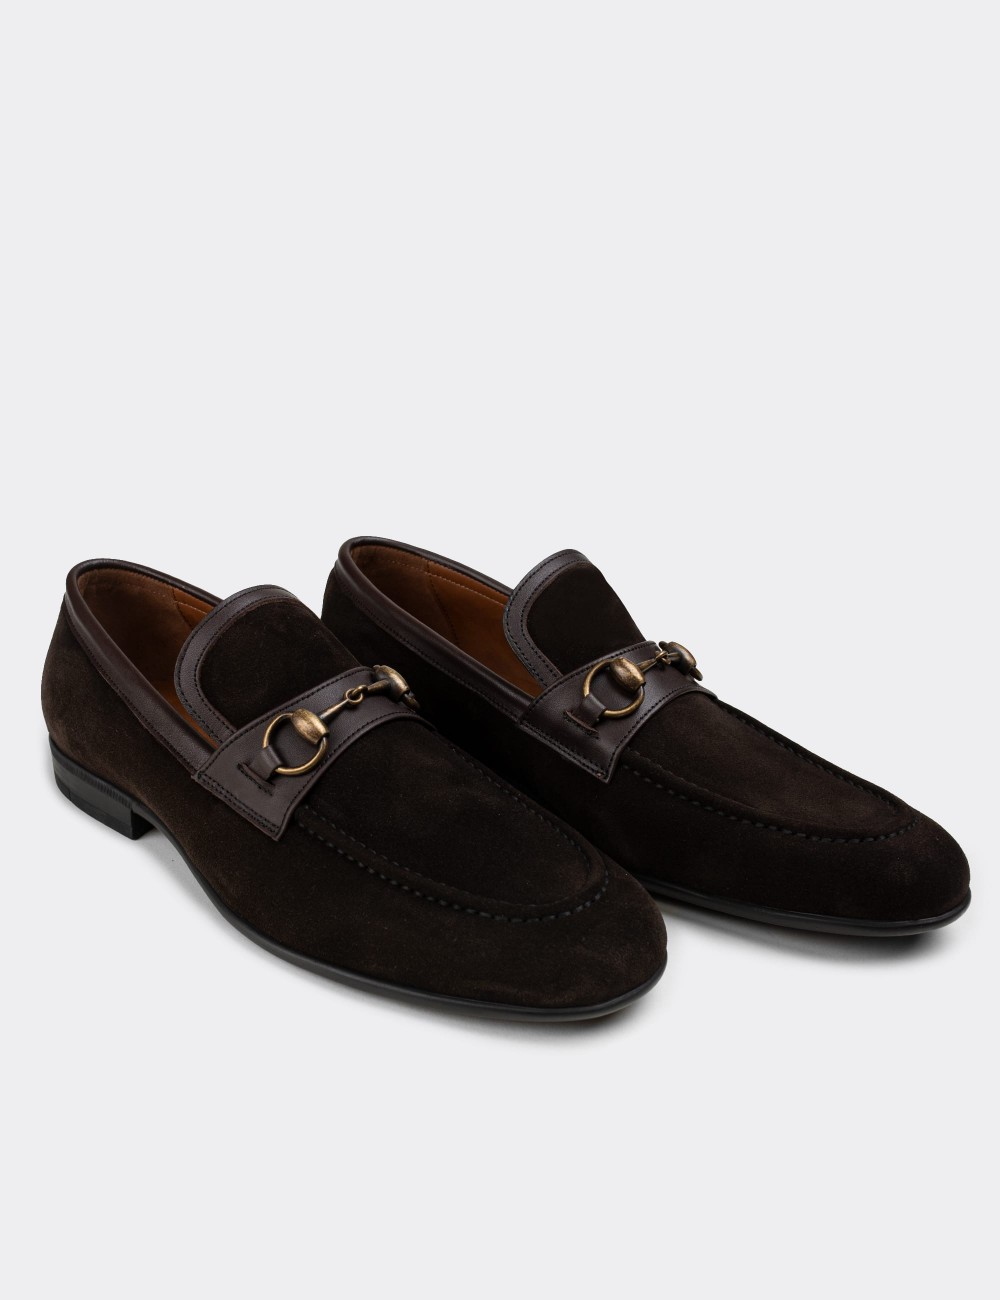 Brown Suede Leather Loafers - 01712MKHVC02